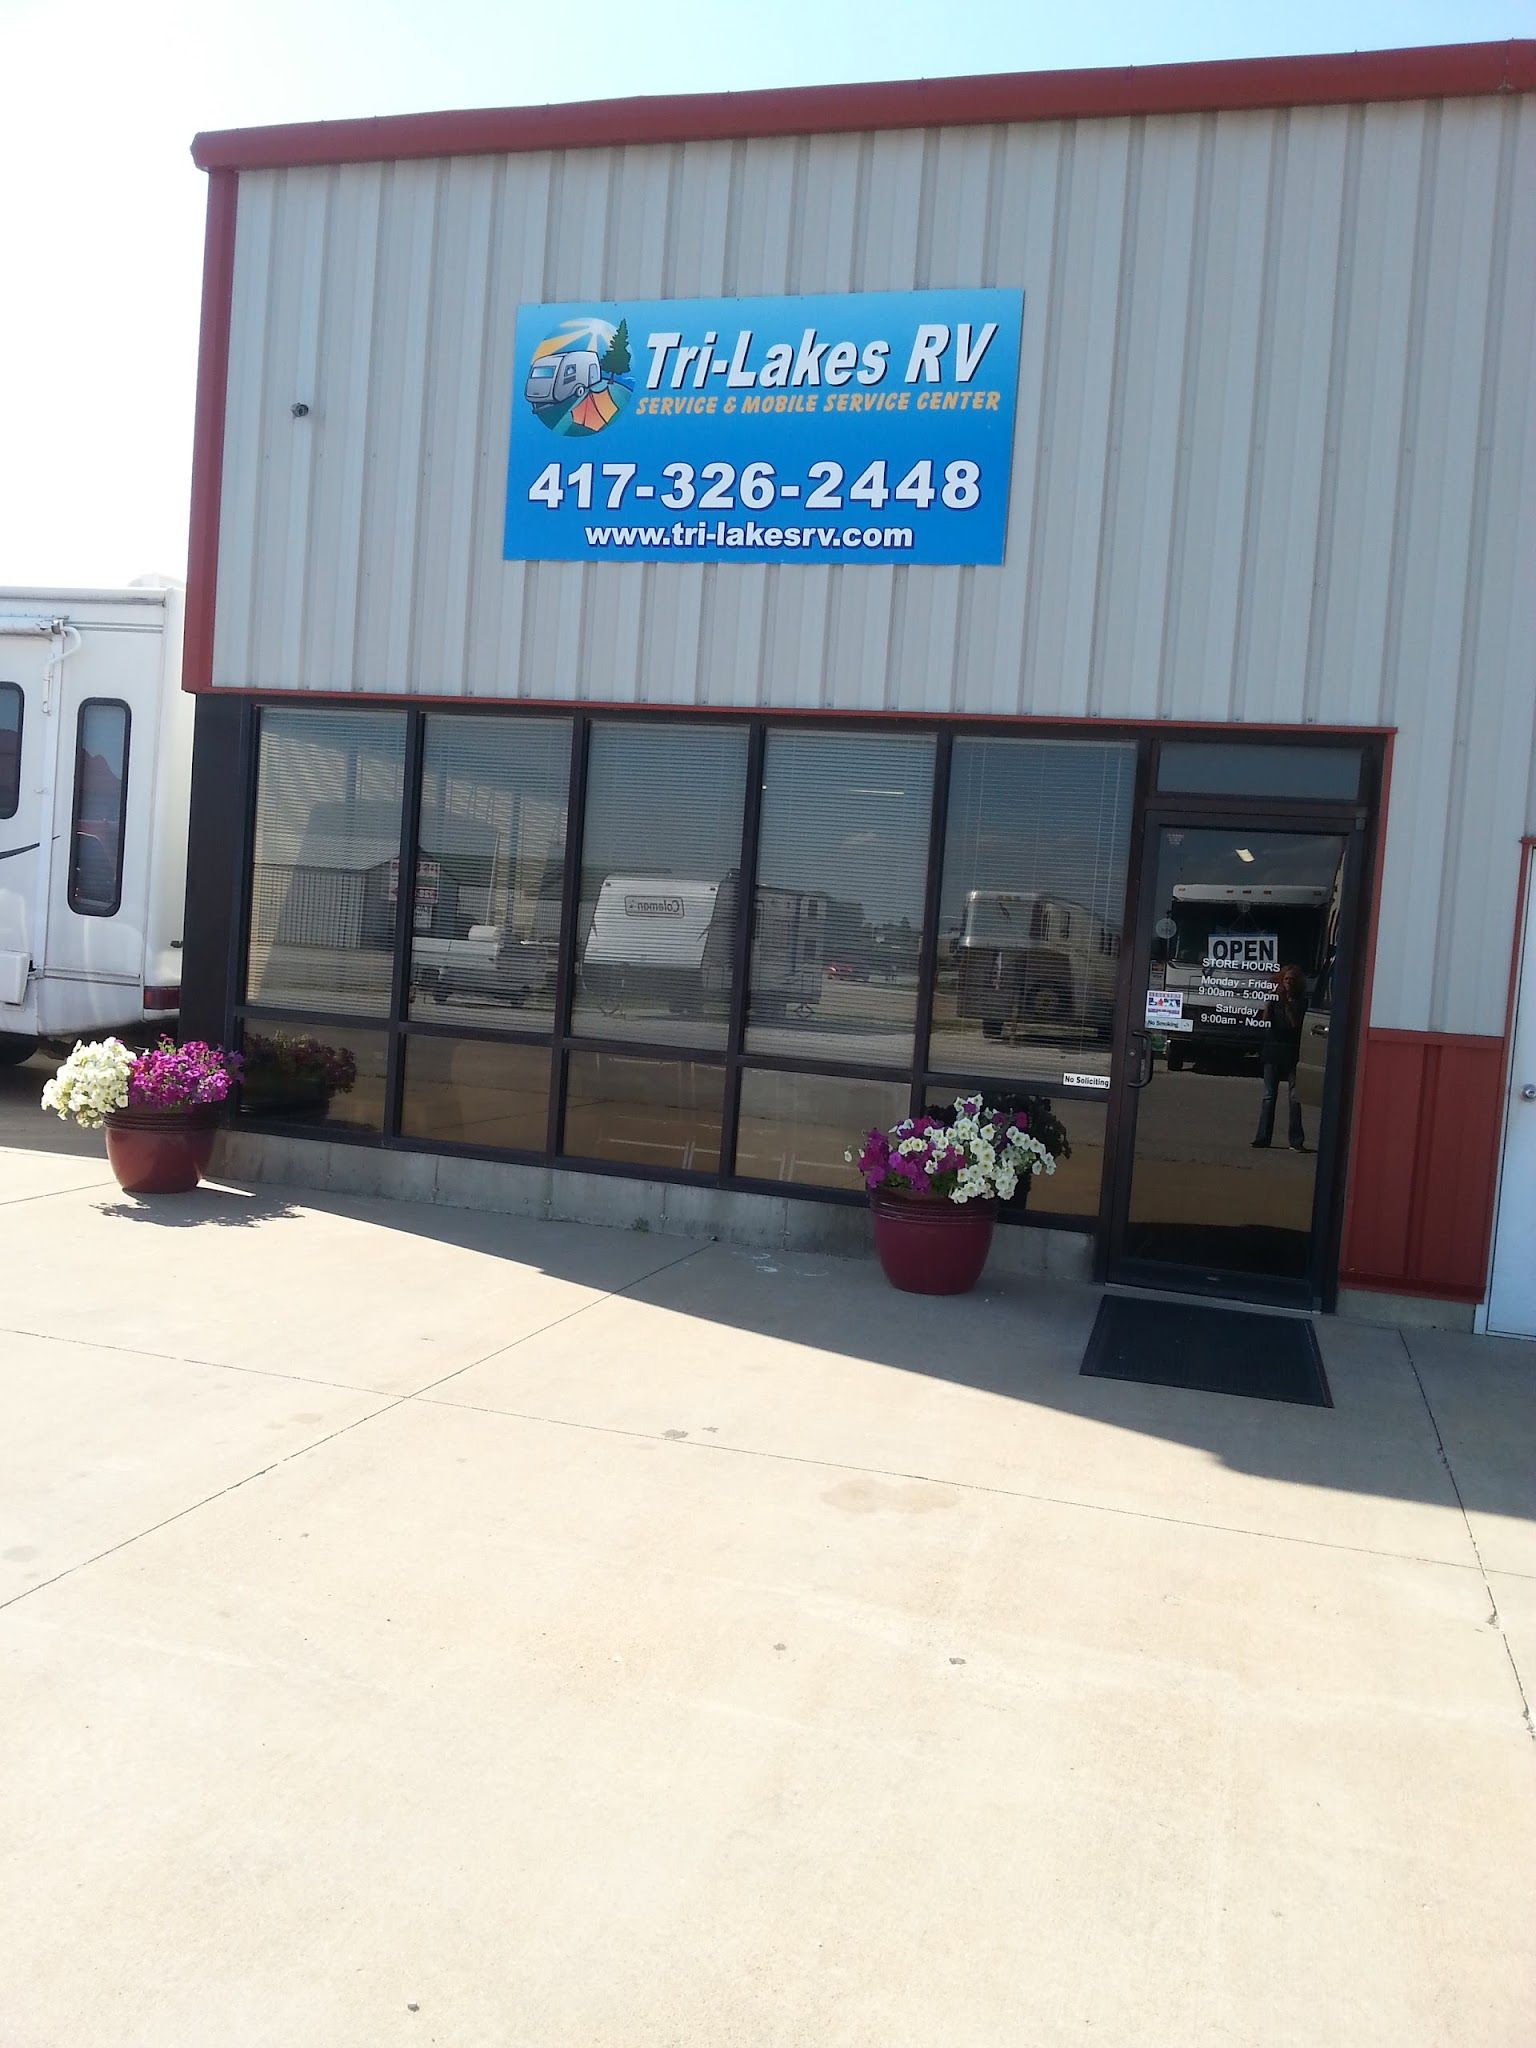 Services & Products Tri-Lakes RV in Bolivar MO